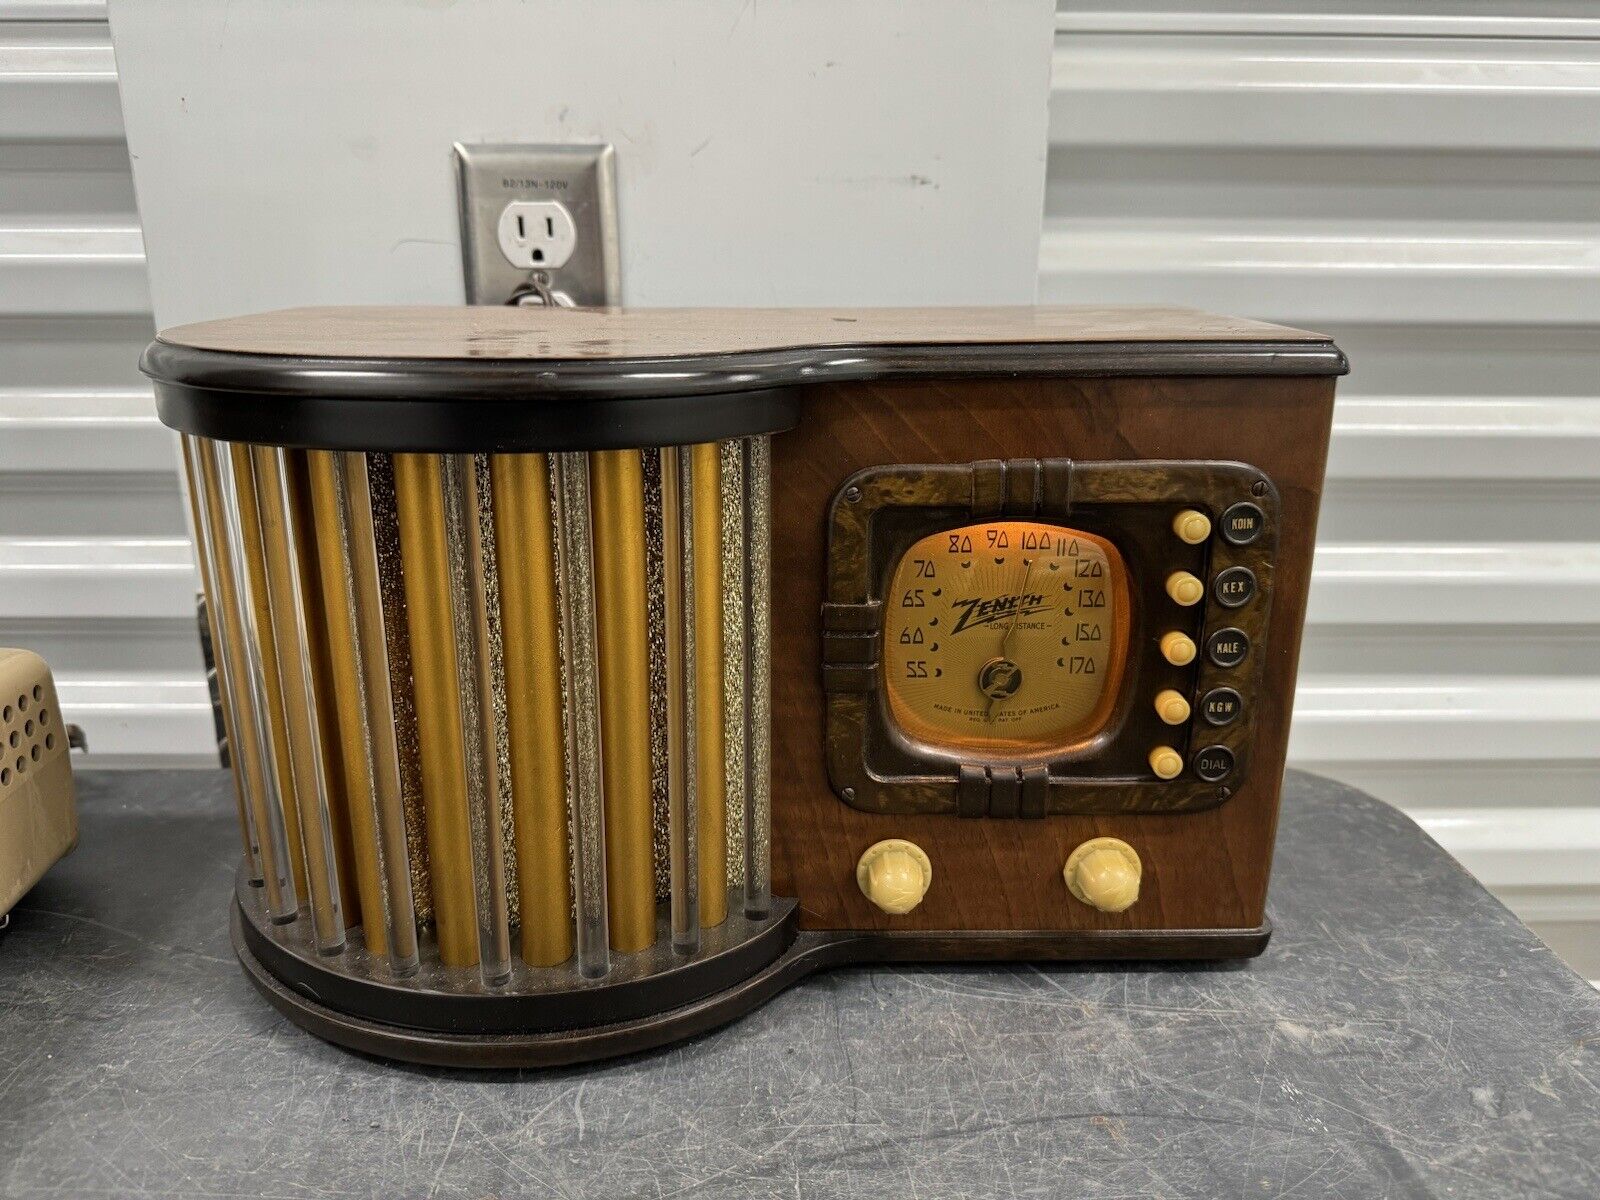 1938-1939 ZENITH 5R317 - WORLD'S FAIR SPECIAL- GOLD & GLASS ROD TUBE RADIO WORKS